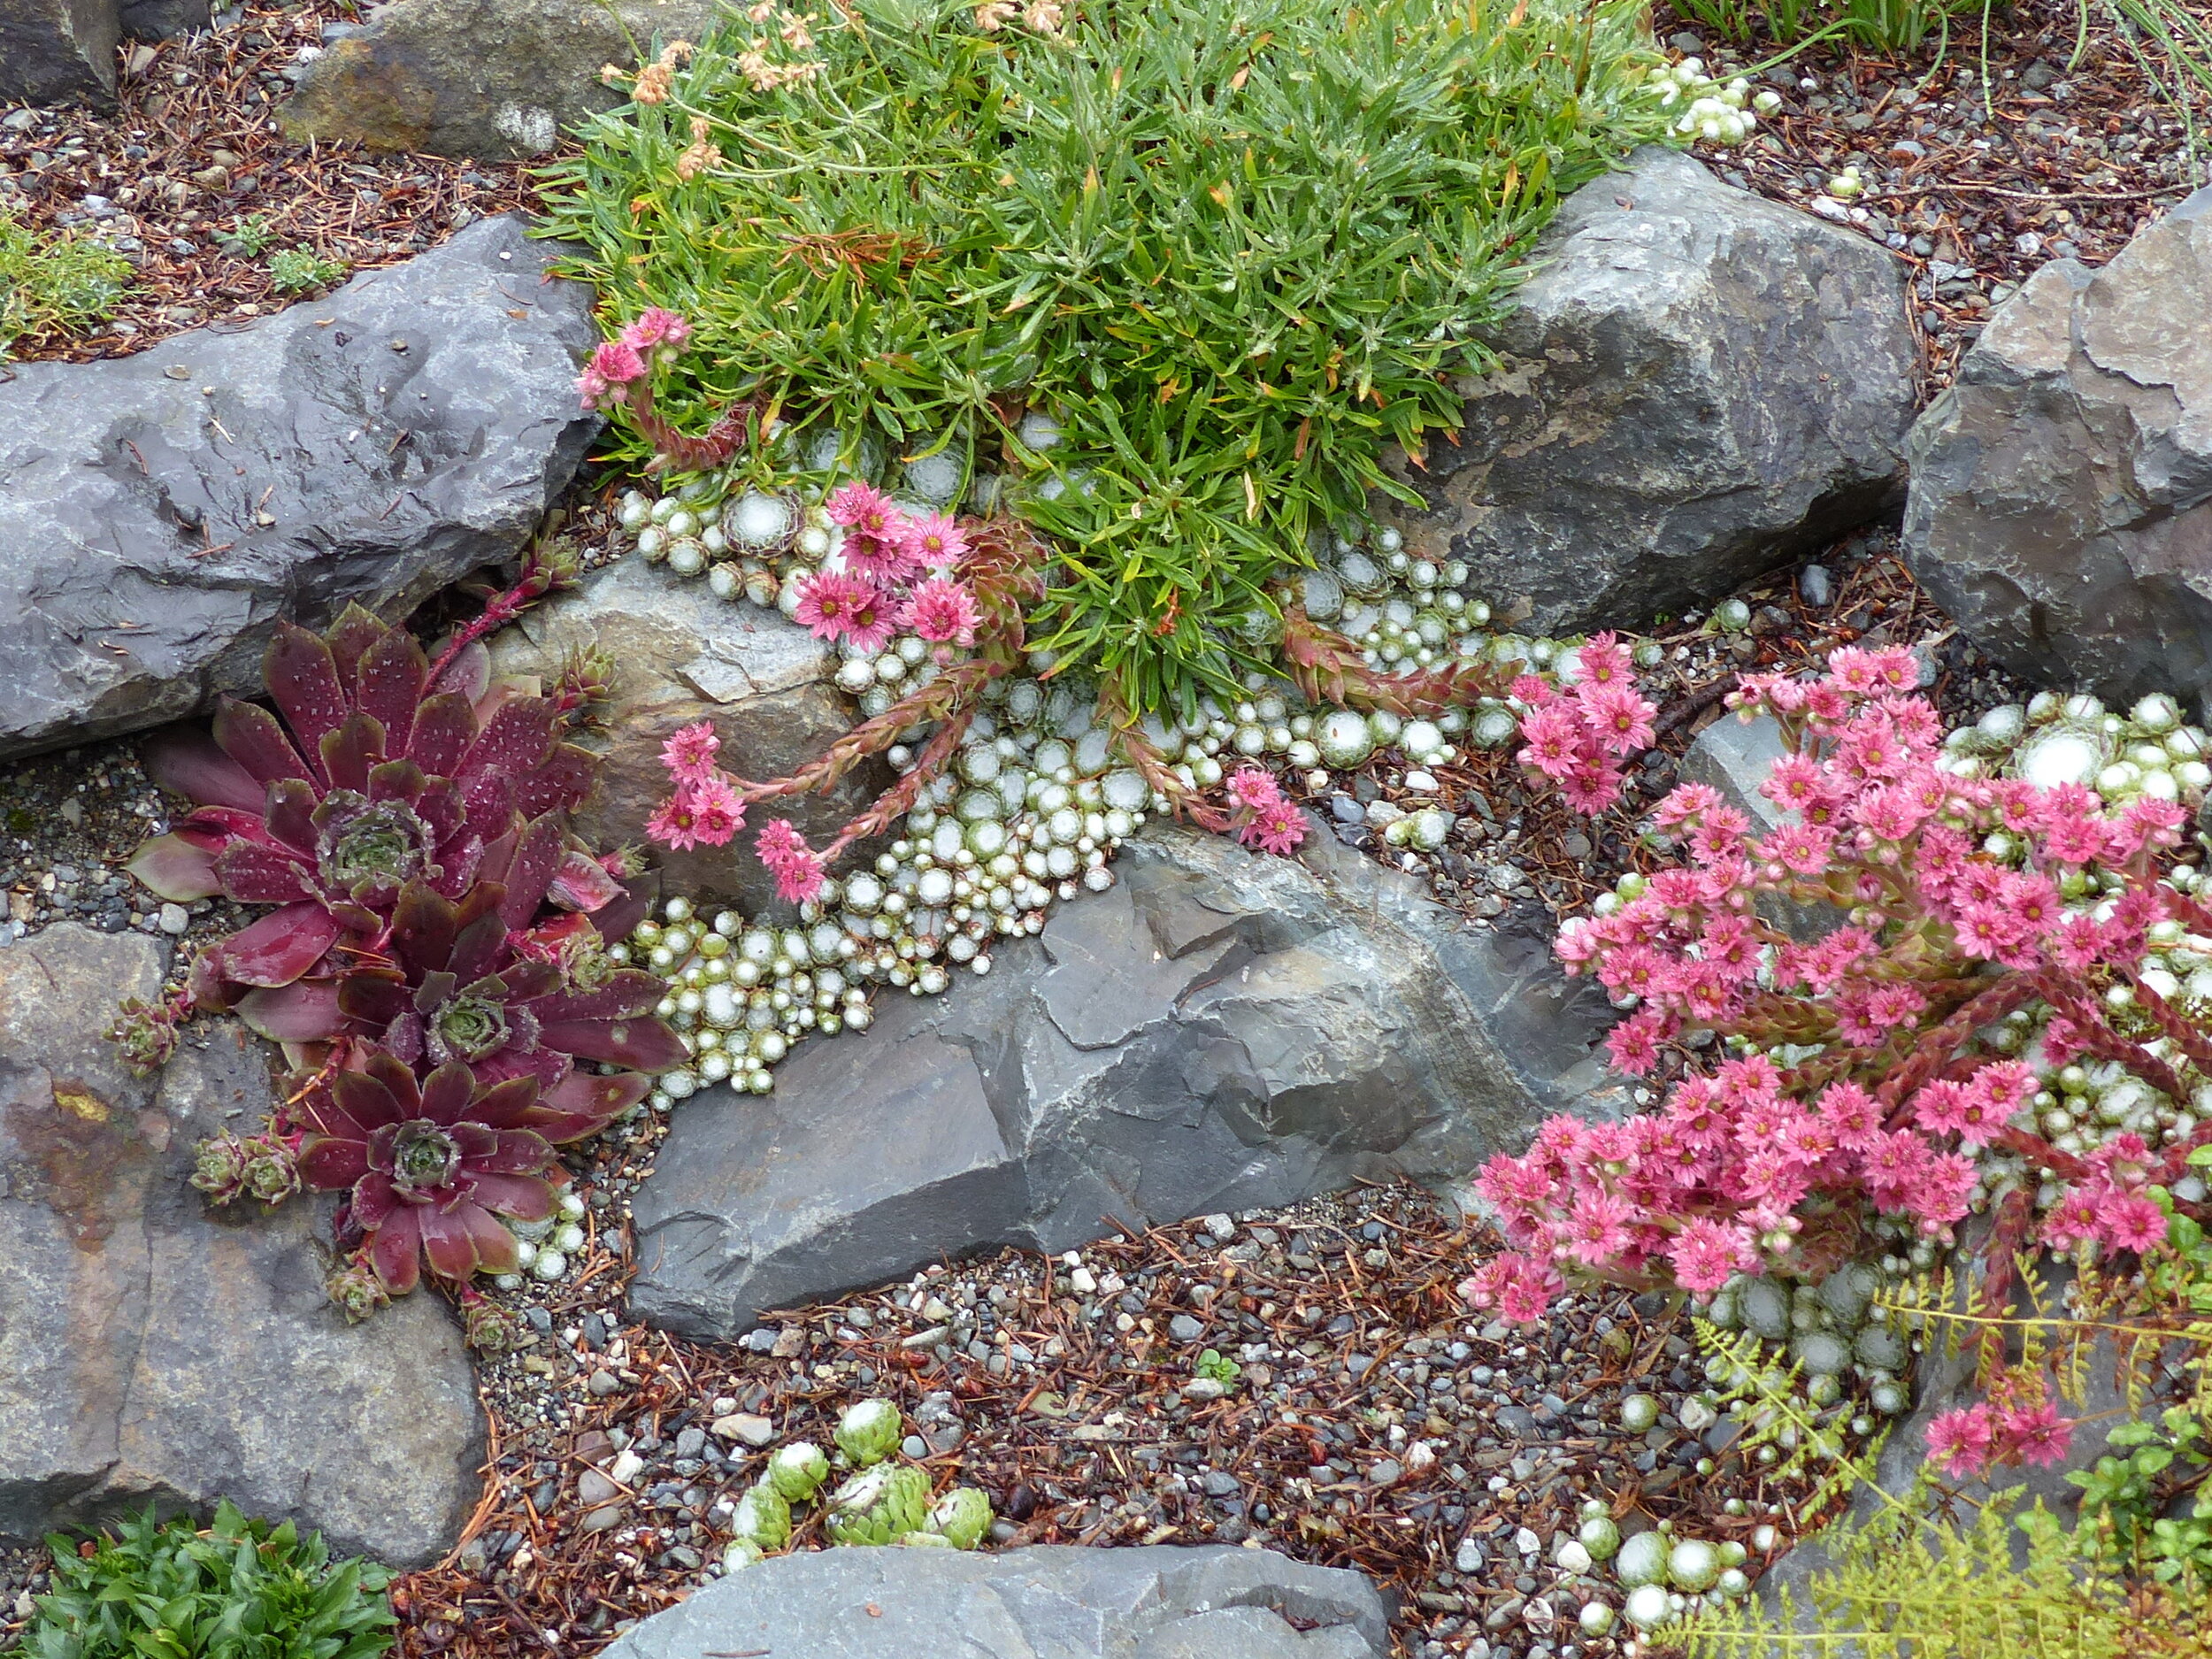  Varieties of Sedum and Sempervivums, also know as Hen and Chicks, fill the cracks and crevices between the rocks. 